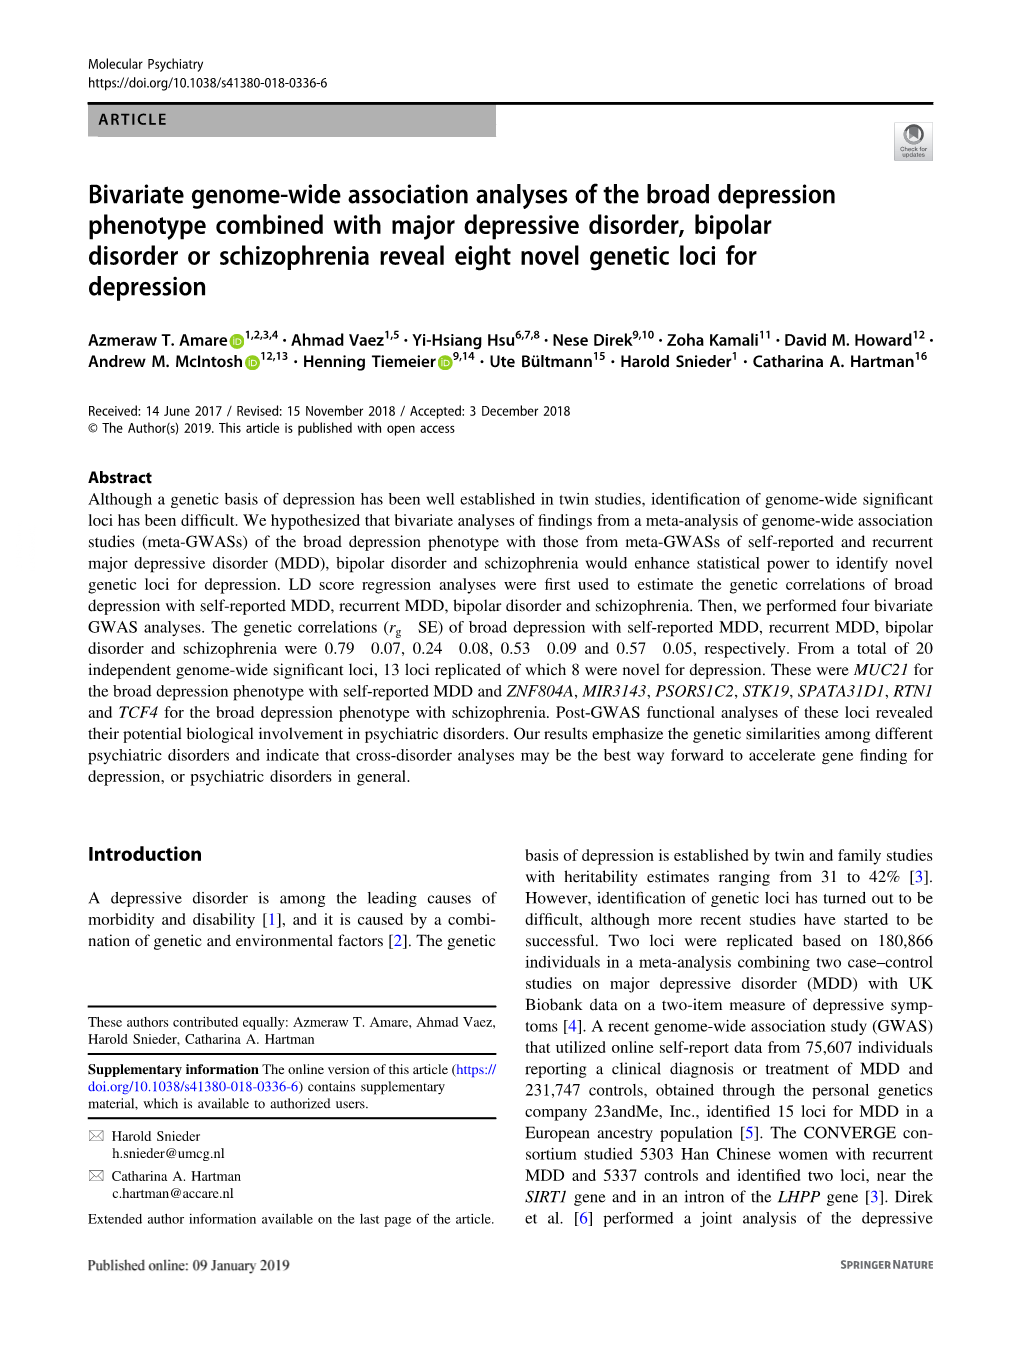 Bivariate Genome-Wide Association Analyses of the Broad Depression Phenotype Combined with Major Depressive Disorder, Bipolar Di